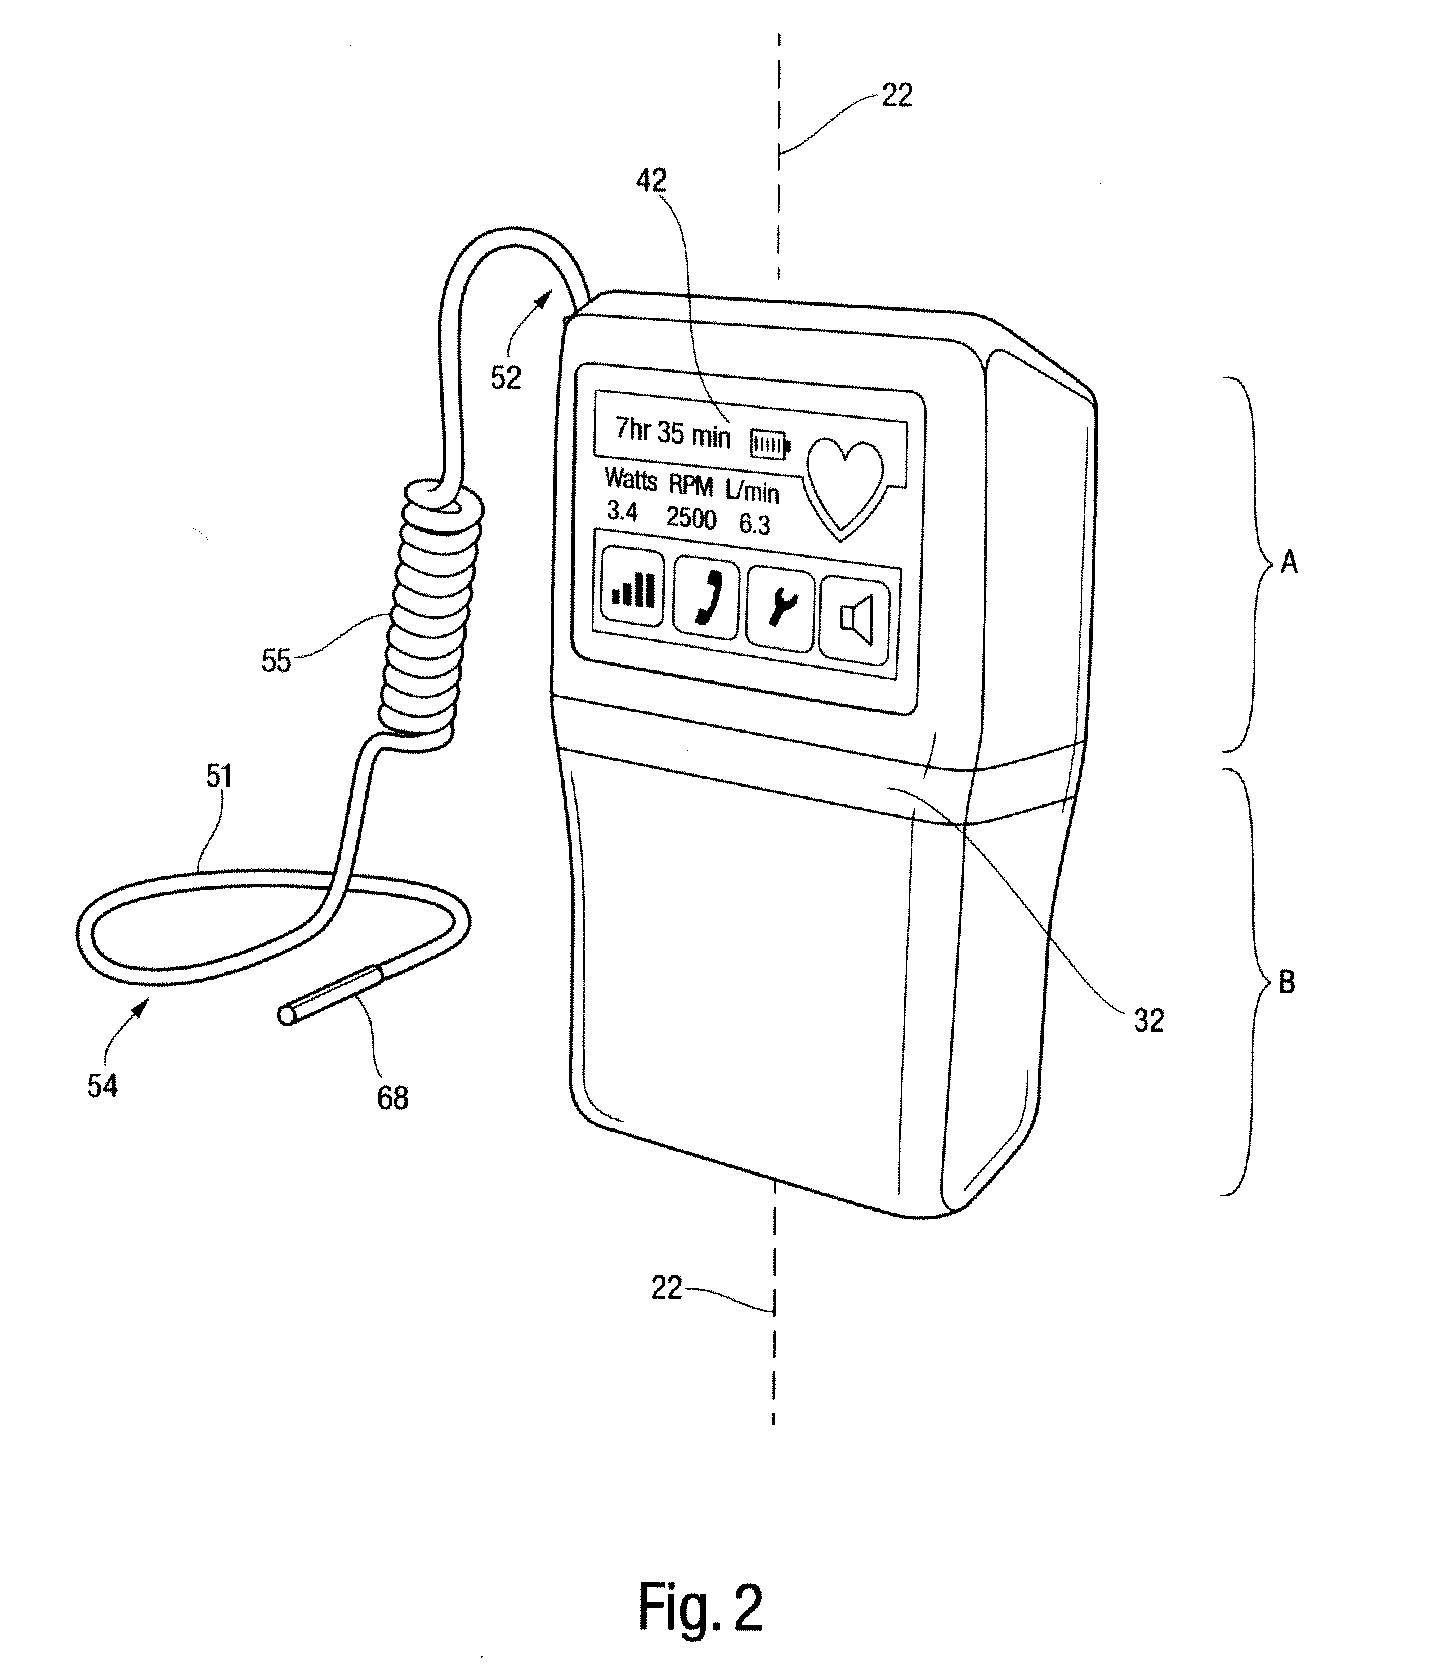 Controller and power source for implantable blood pump